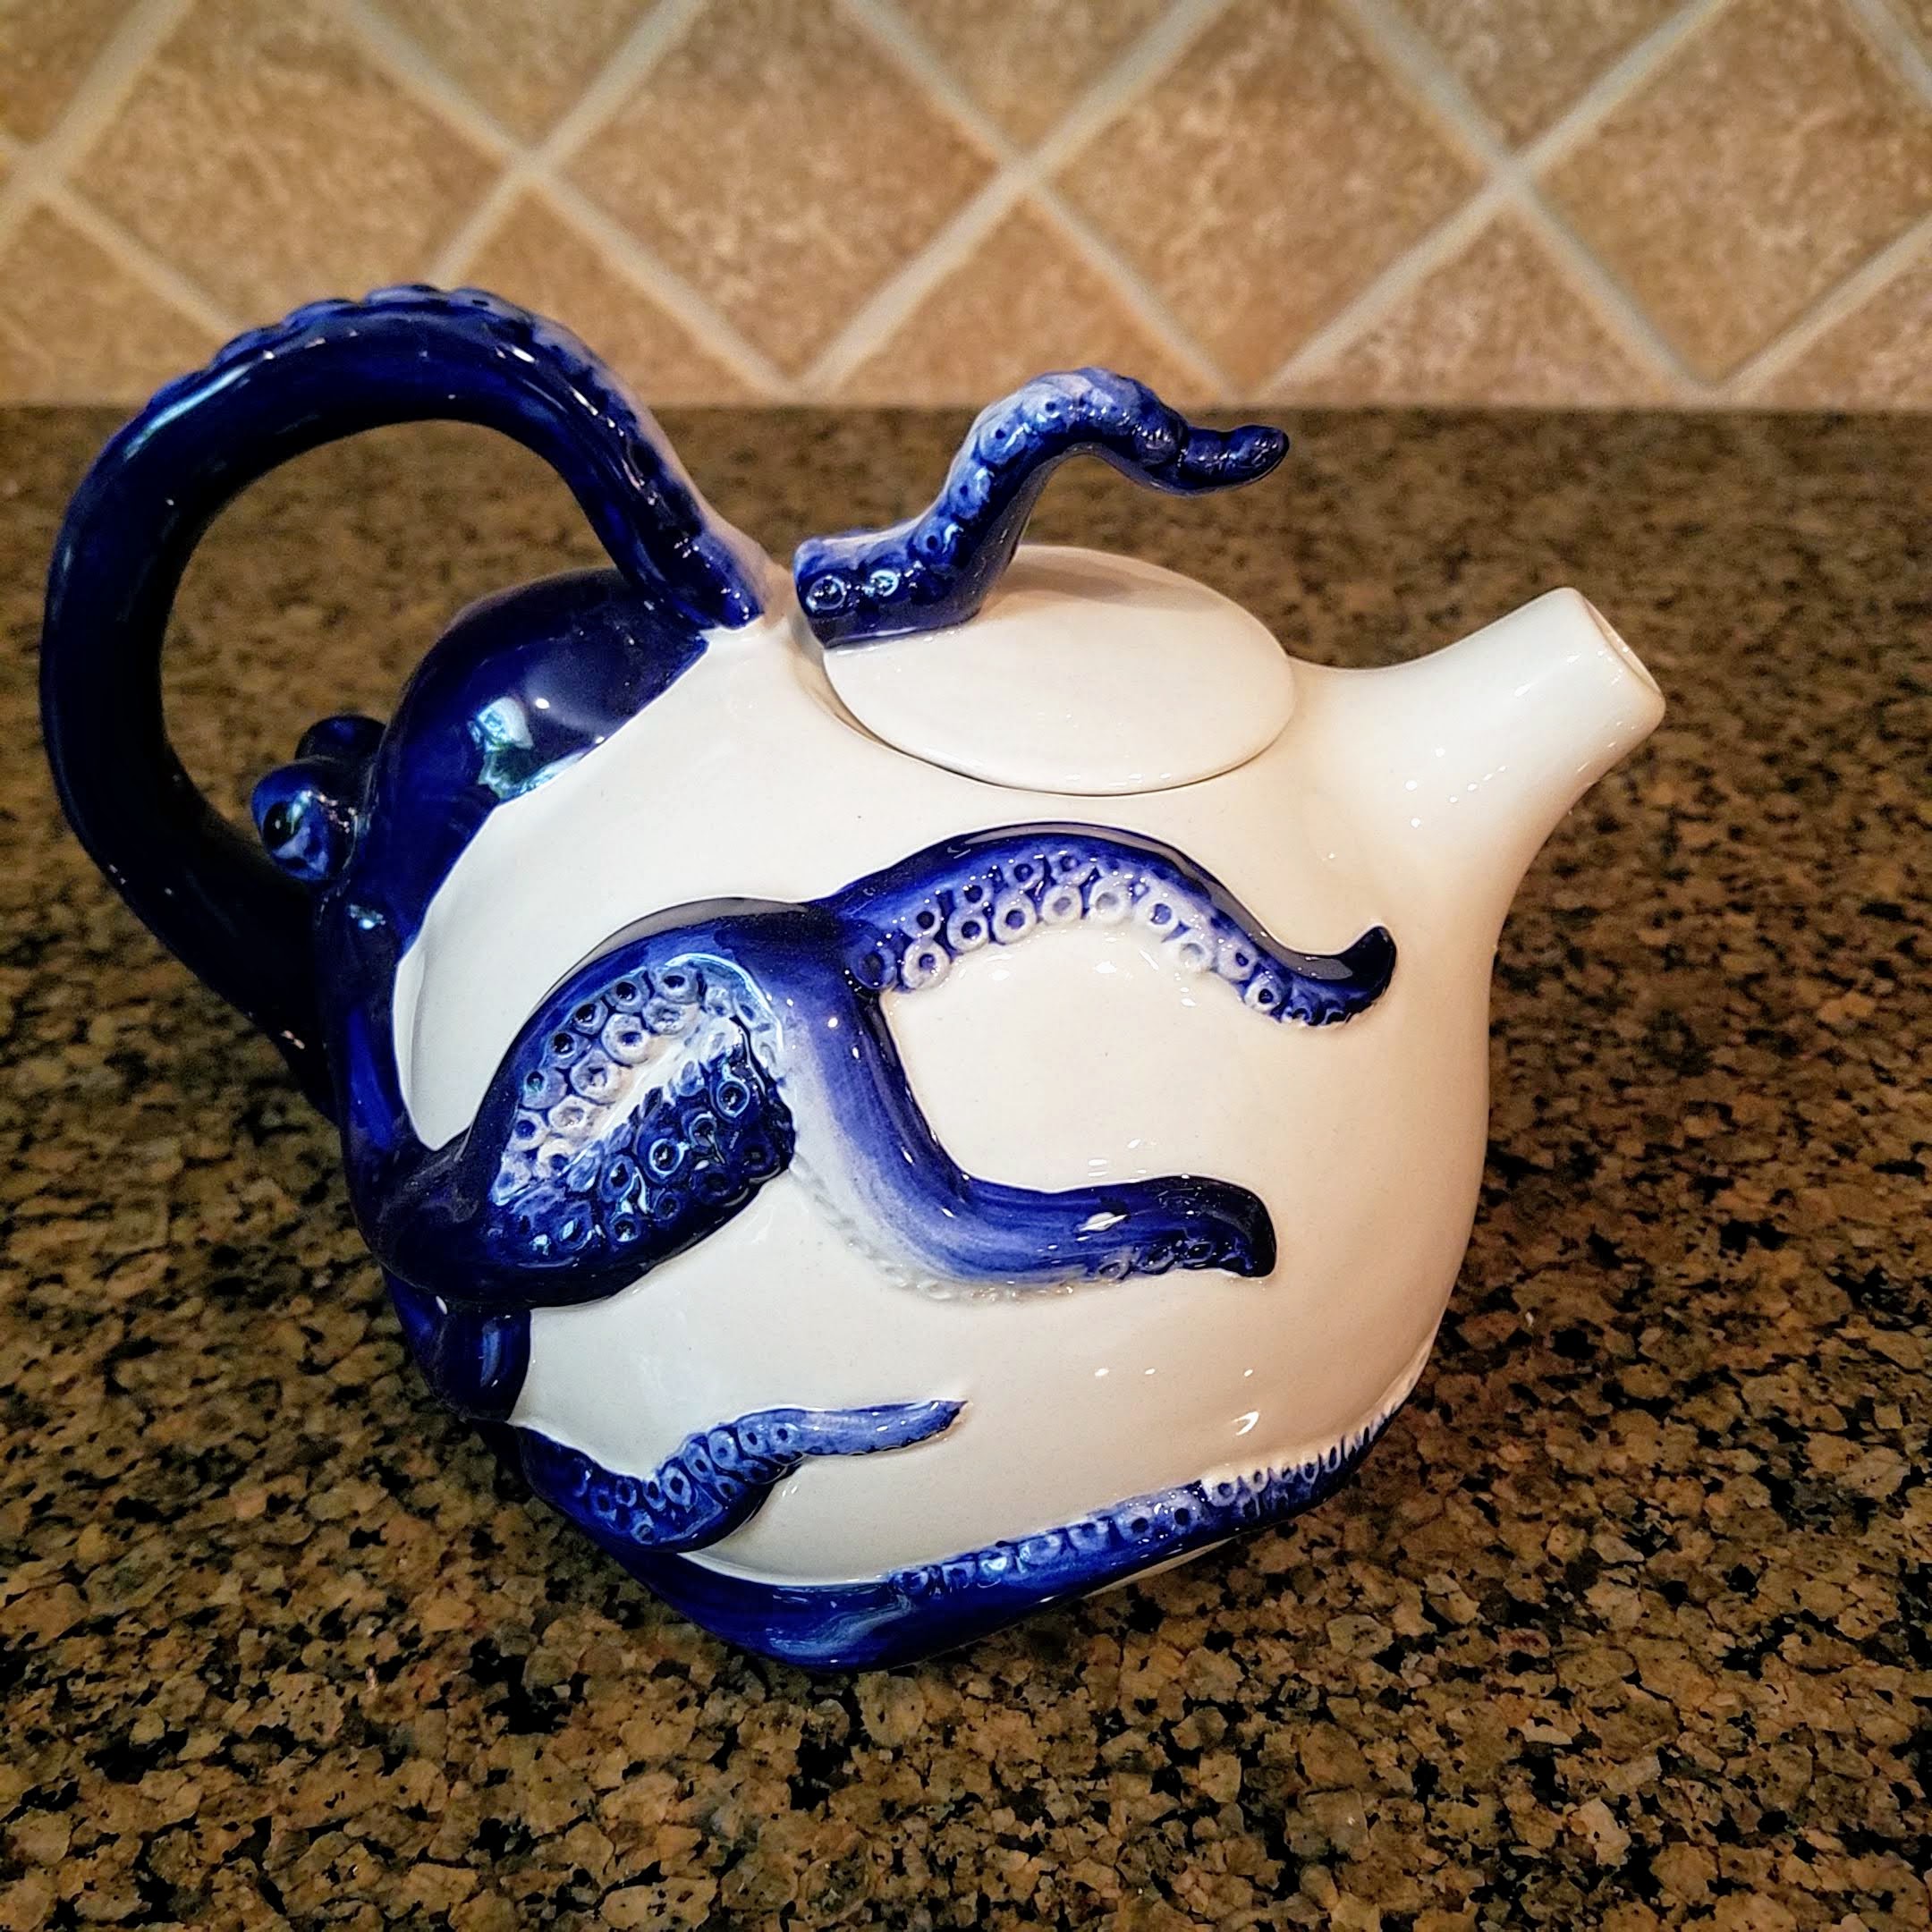 This Blue Octopus Ceramic Teapot Decorative Collectable Kitchen Décor Goldmic New is made with love by Premier Homegoods! Shop more unique gift ideas today with Spots Initiatives, the best way to support creators.